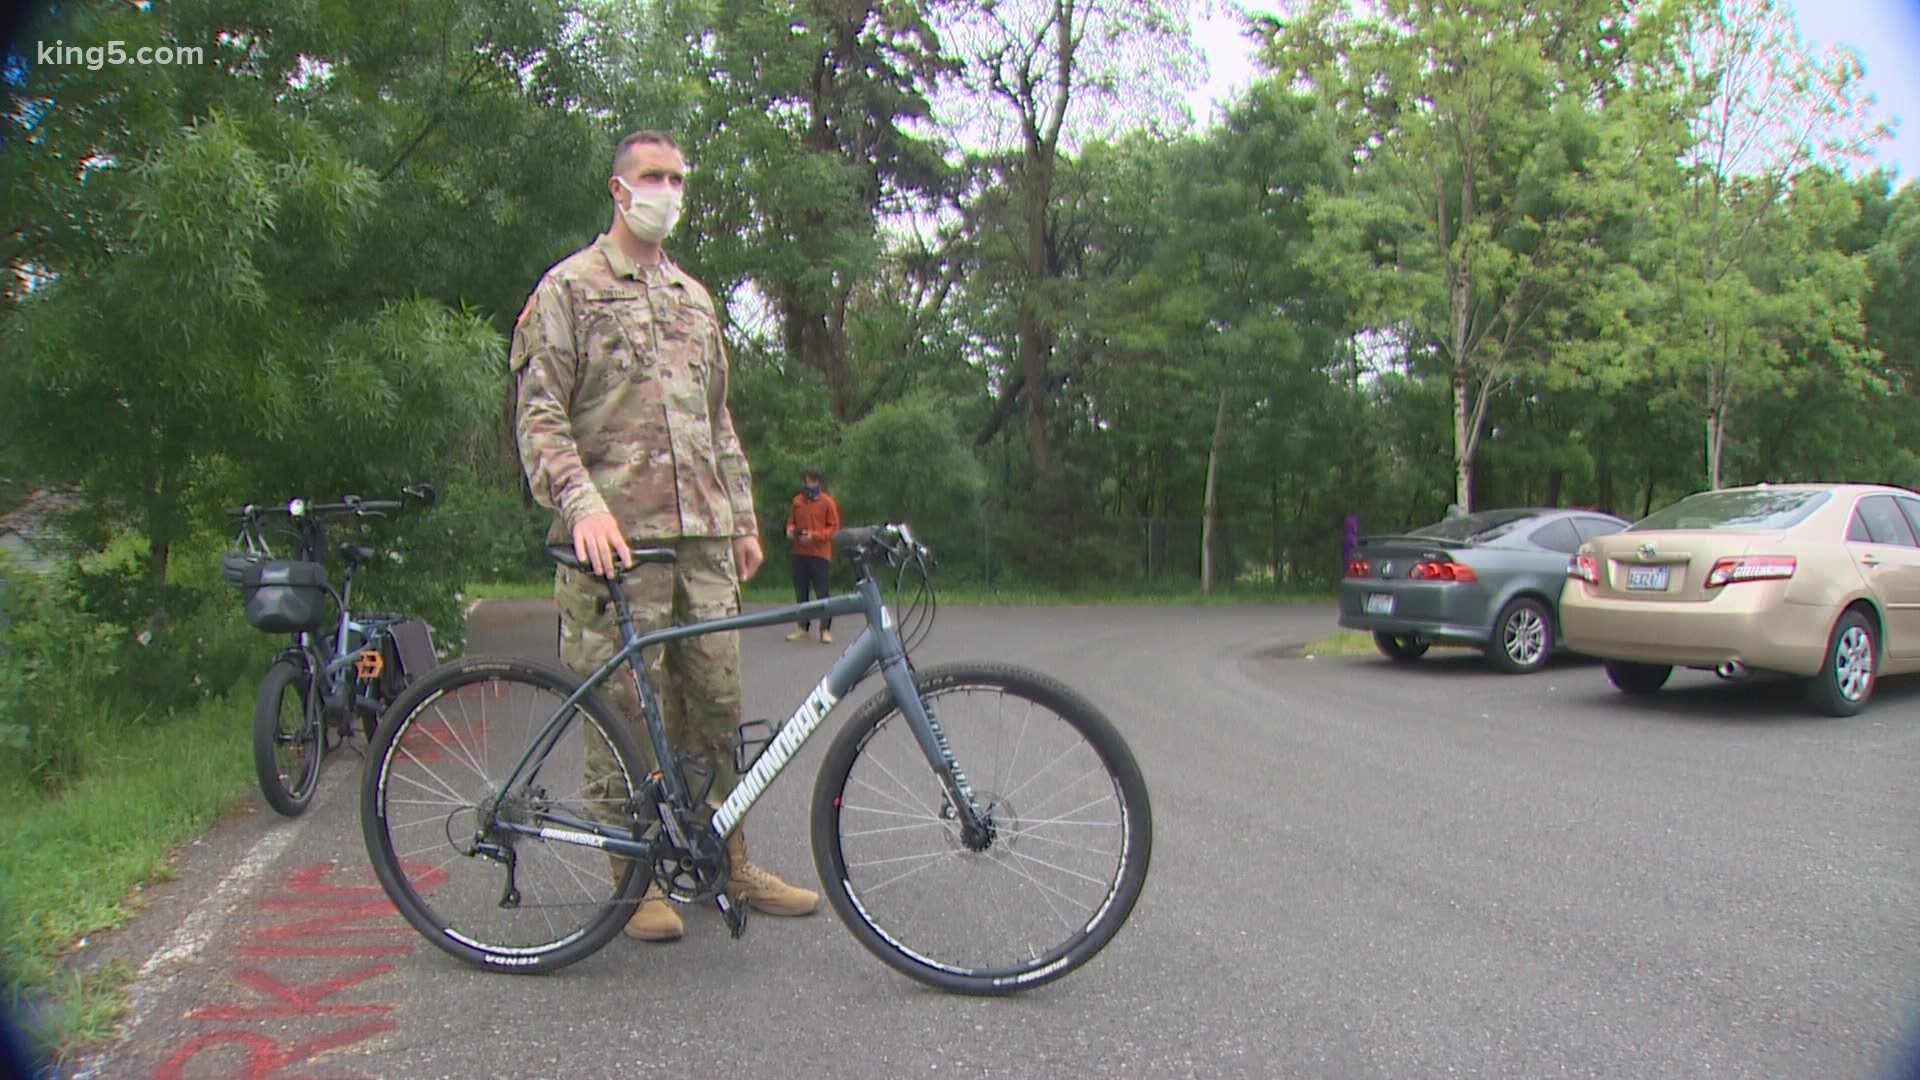 The Cascade Bicycle Club donated bicycles to National Guardsmen who were, until now, delivering food donations on foot.